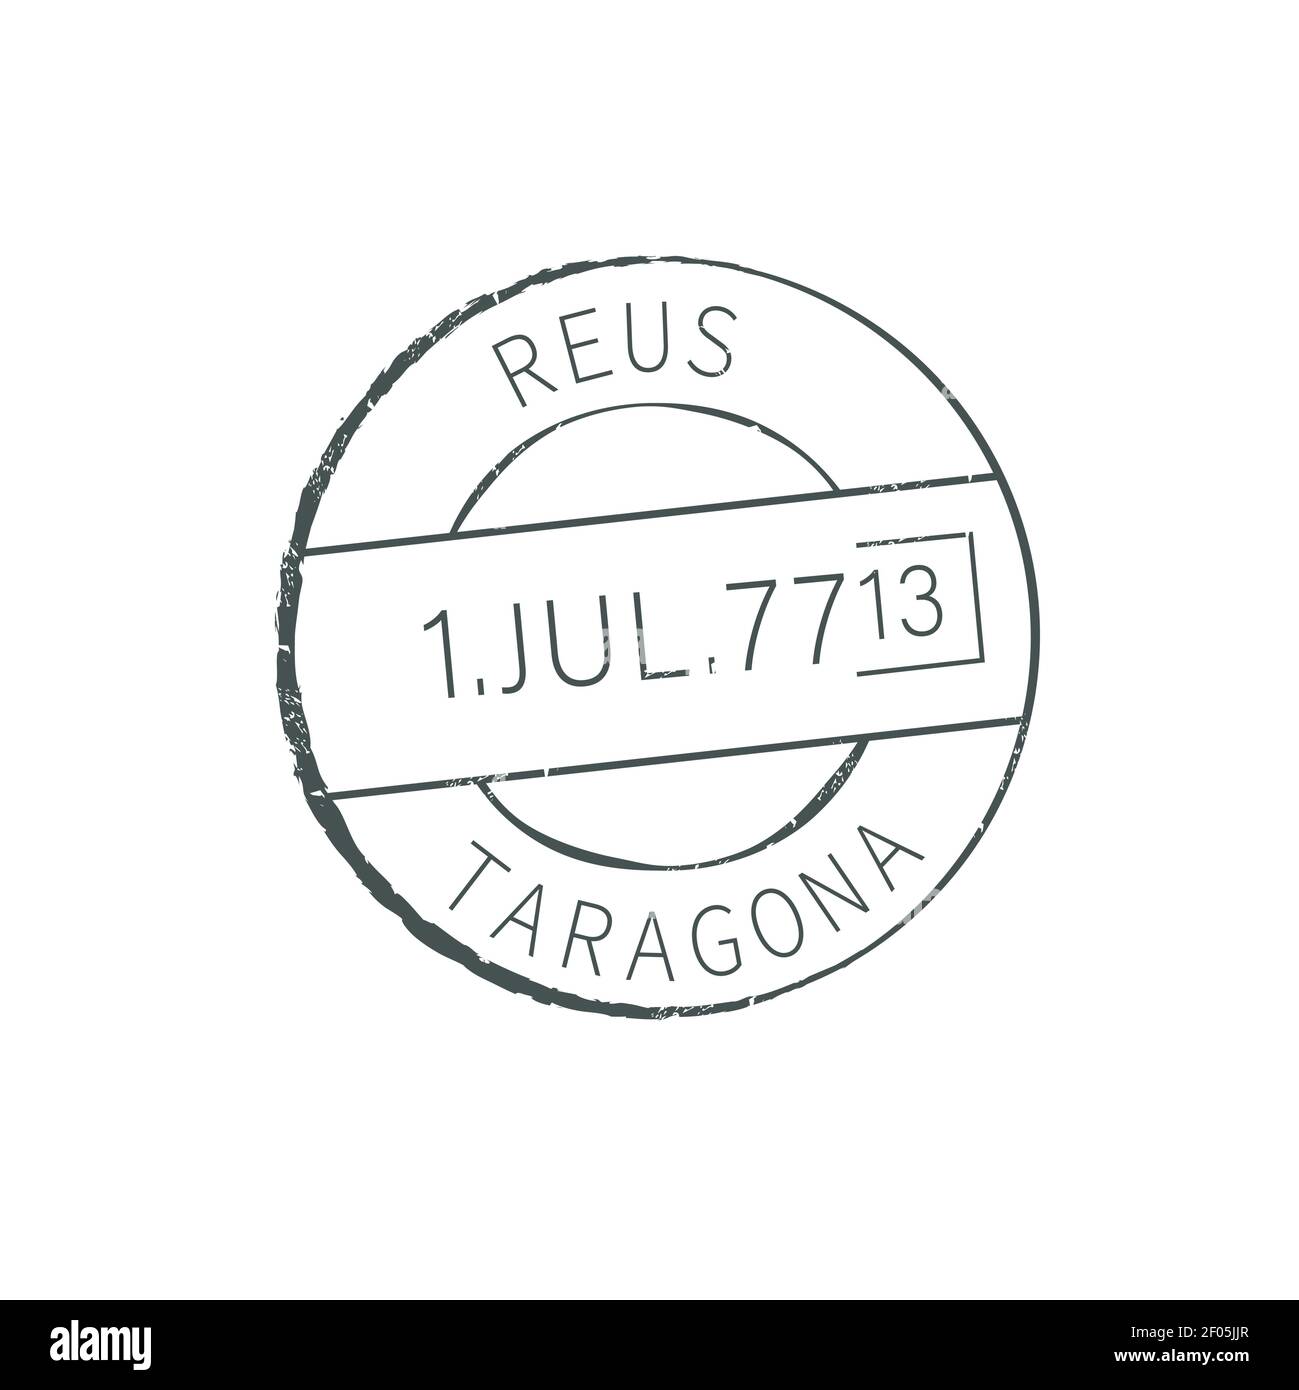 Reus post stamp of Tarragona isolated round seal. Vector postage service symbol, express delivery of mailing correspondence. Postal badge, retro postm Stock Vector